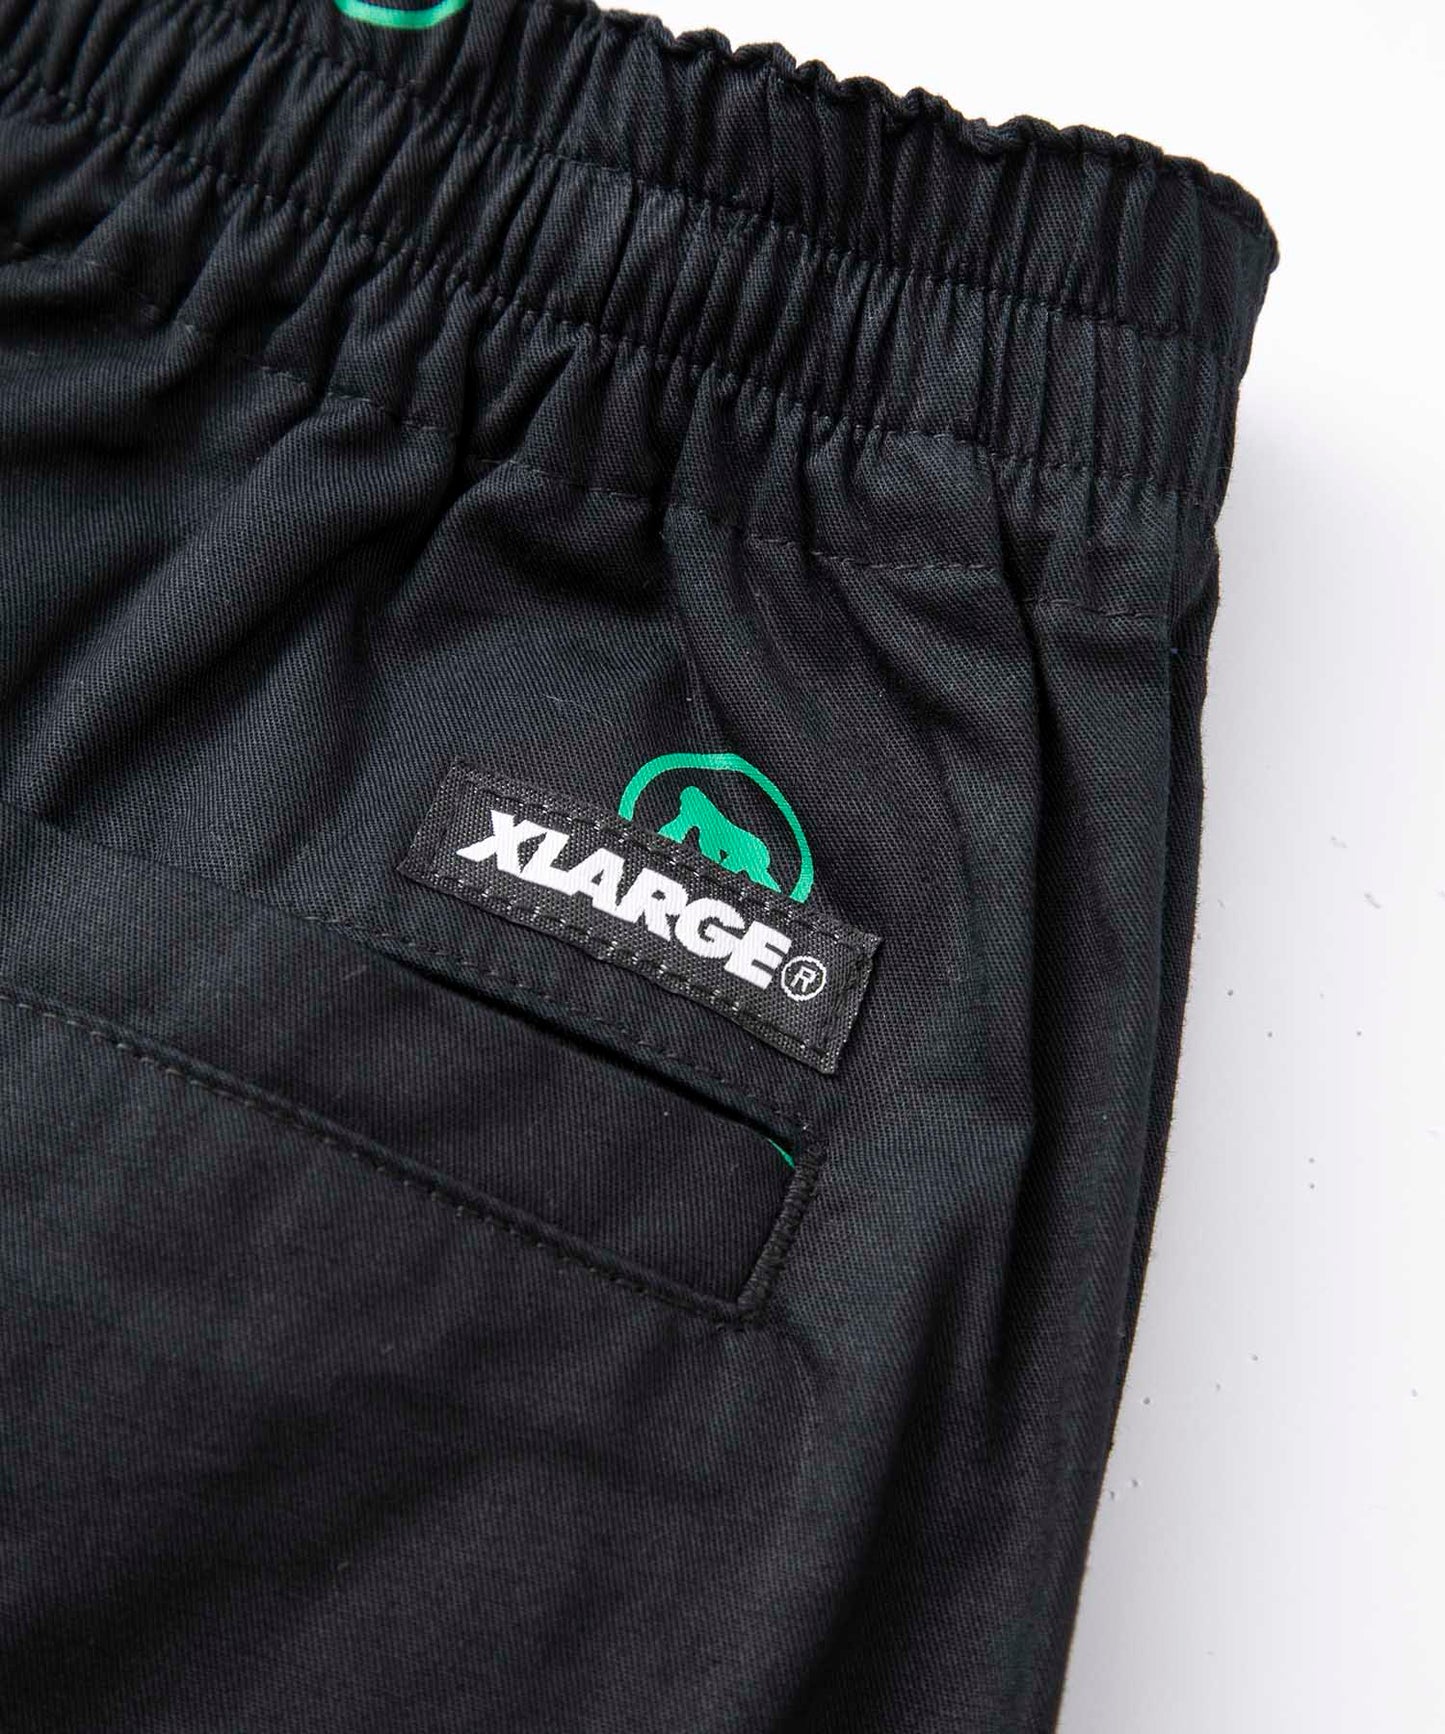 ALLOVER PRINTED LIGHT EASY TYPE PANTS PANTS XLARGE  